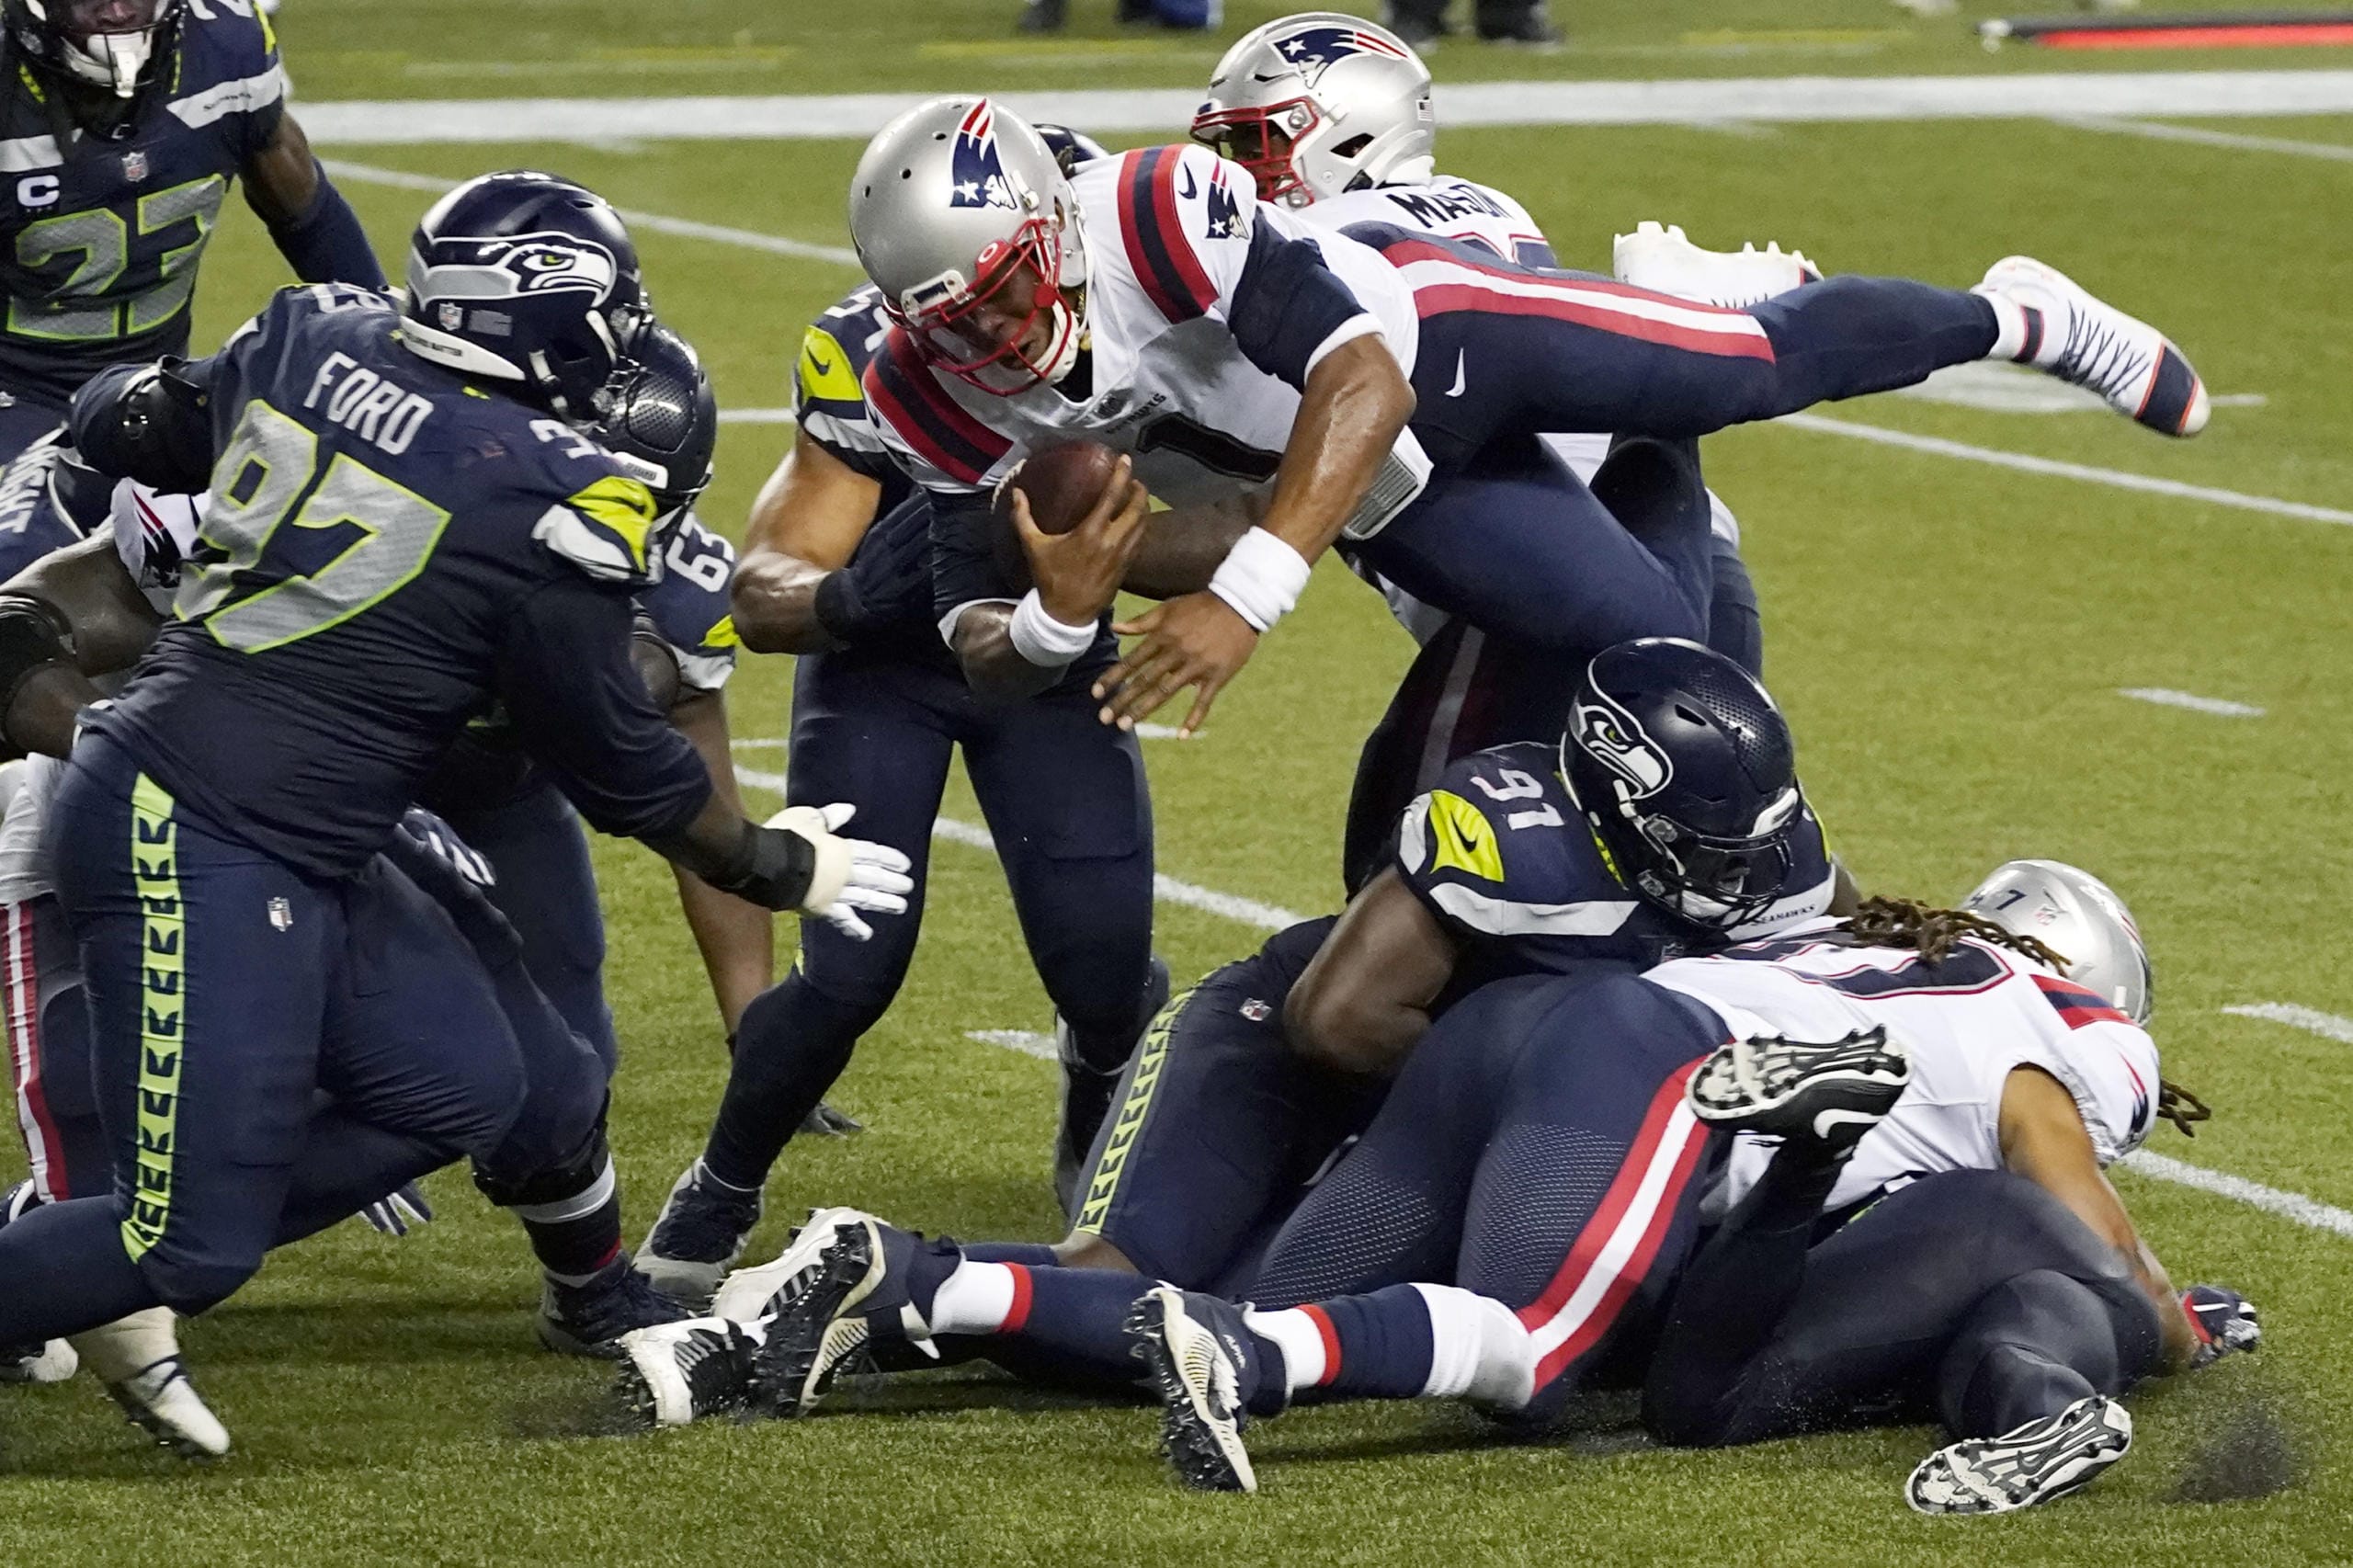 New England Patriots quarterback Cam Newton dives with the ball but is stopped near the goal line as the clock expires in the fourth quarter of an NFL football game against the Seattle Seahawks, Sunday, Sept. 20, 2020, in Seattle. The Seahawks won 35-30.